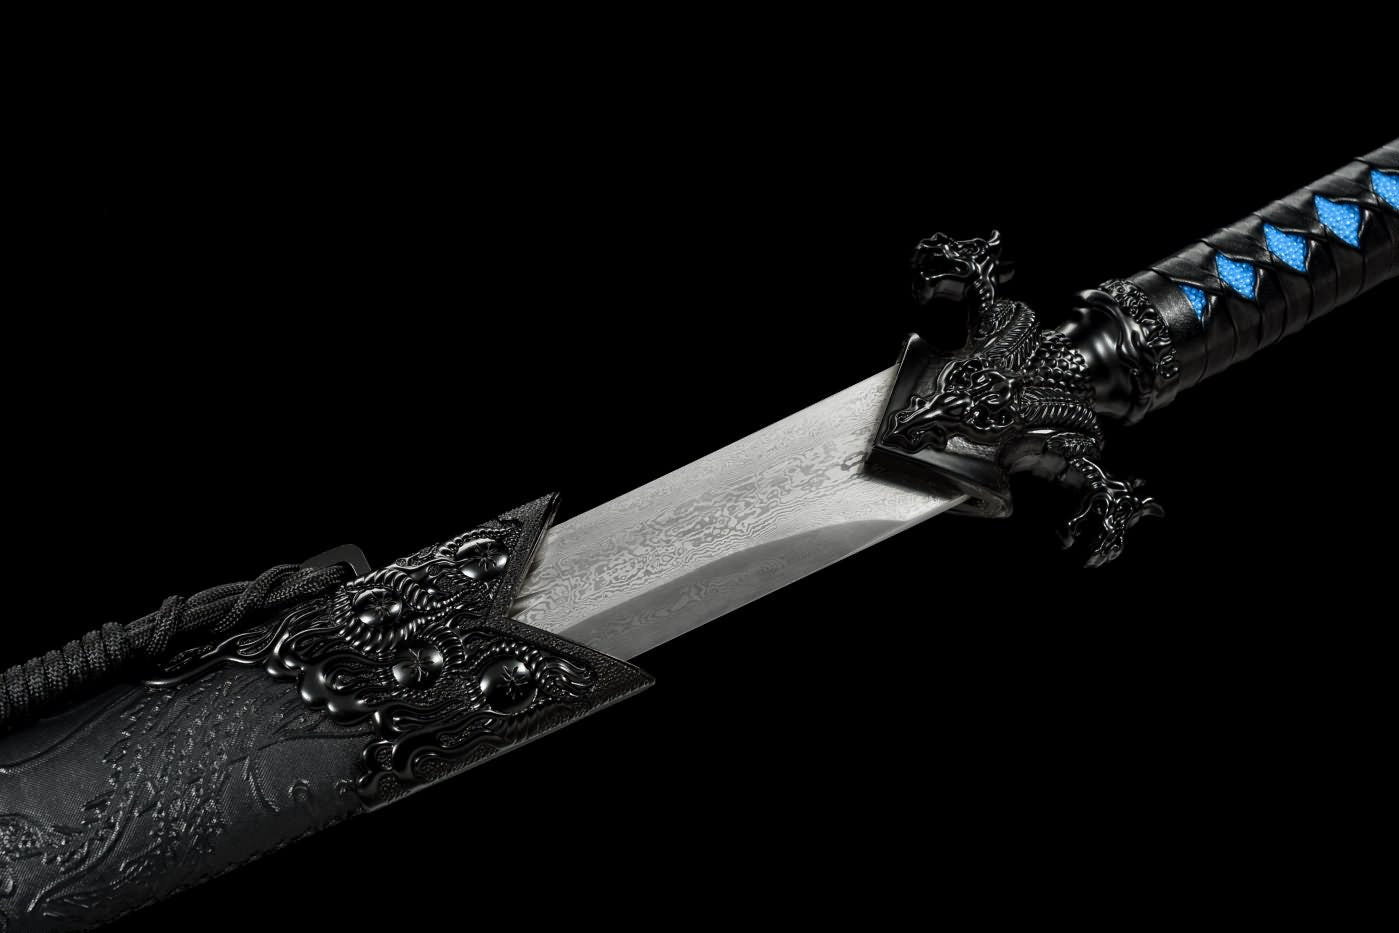 Dragon dao,Machetes Sword Real,Hand Forged Damascus Steel Blade,Alloy Fittings,LOONGSWORD